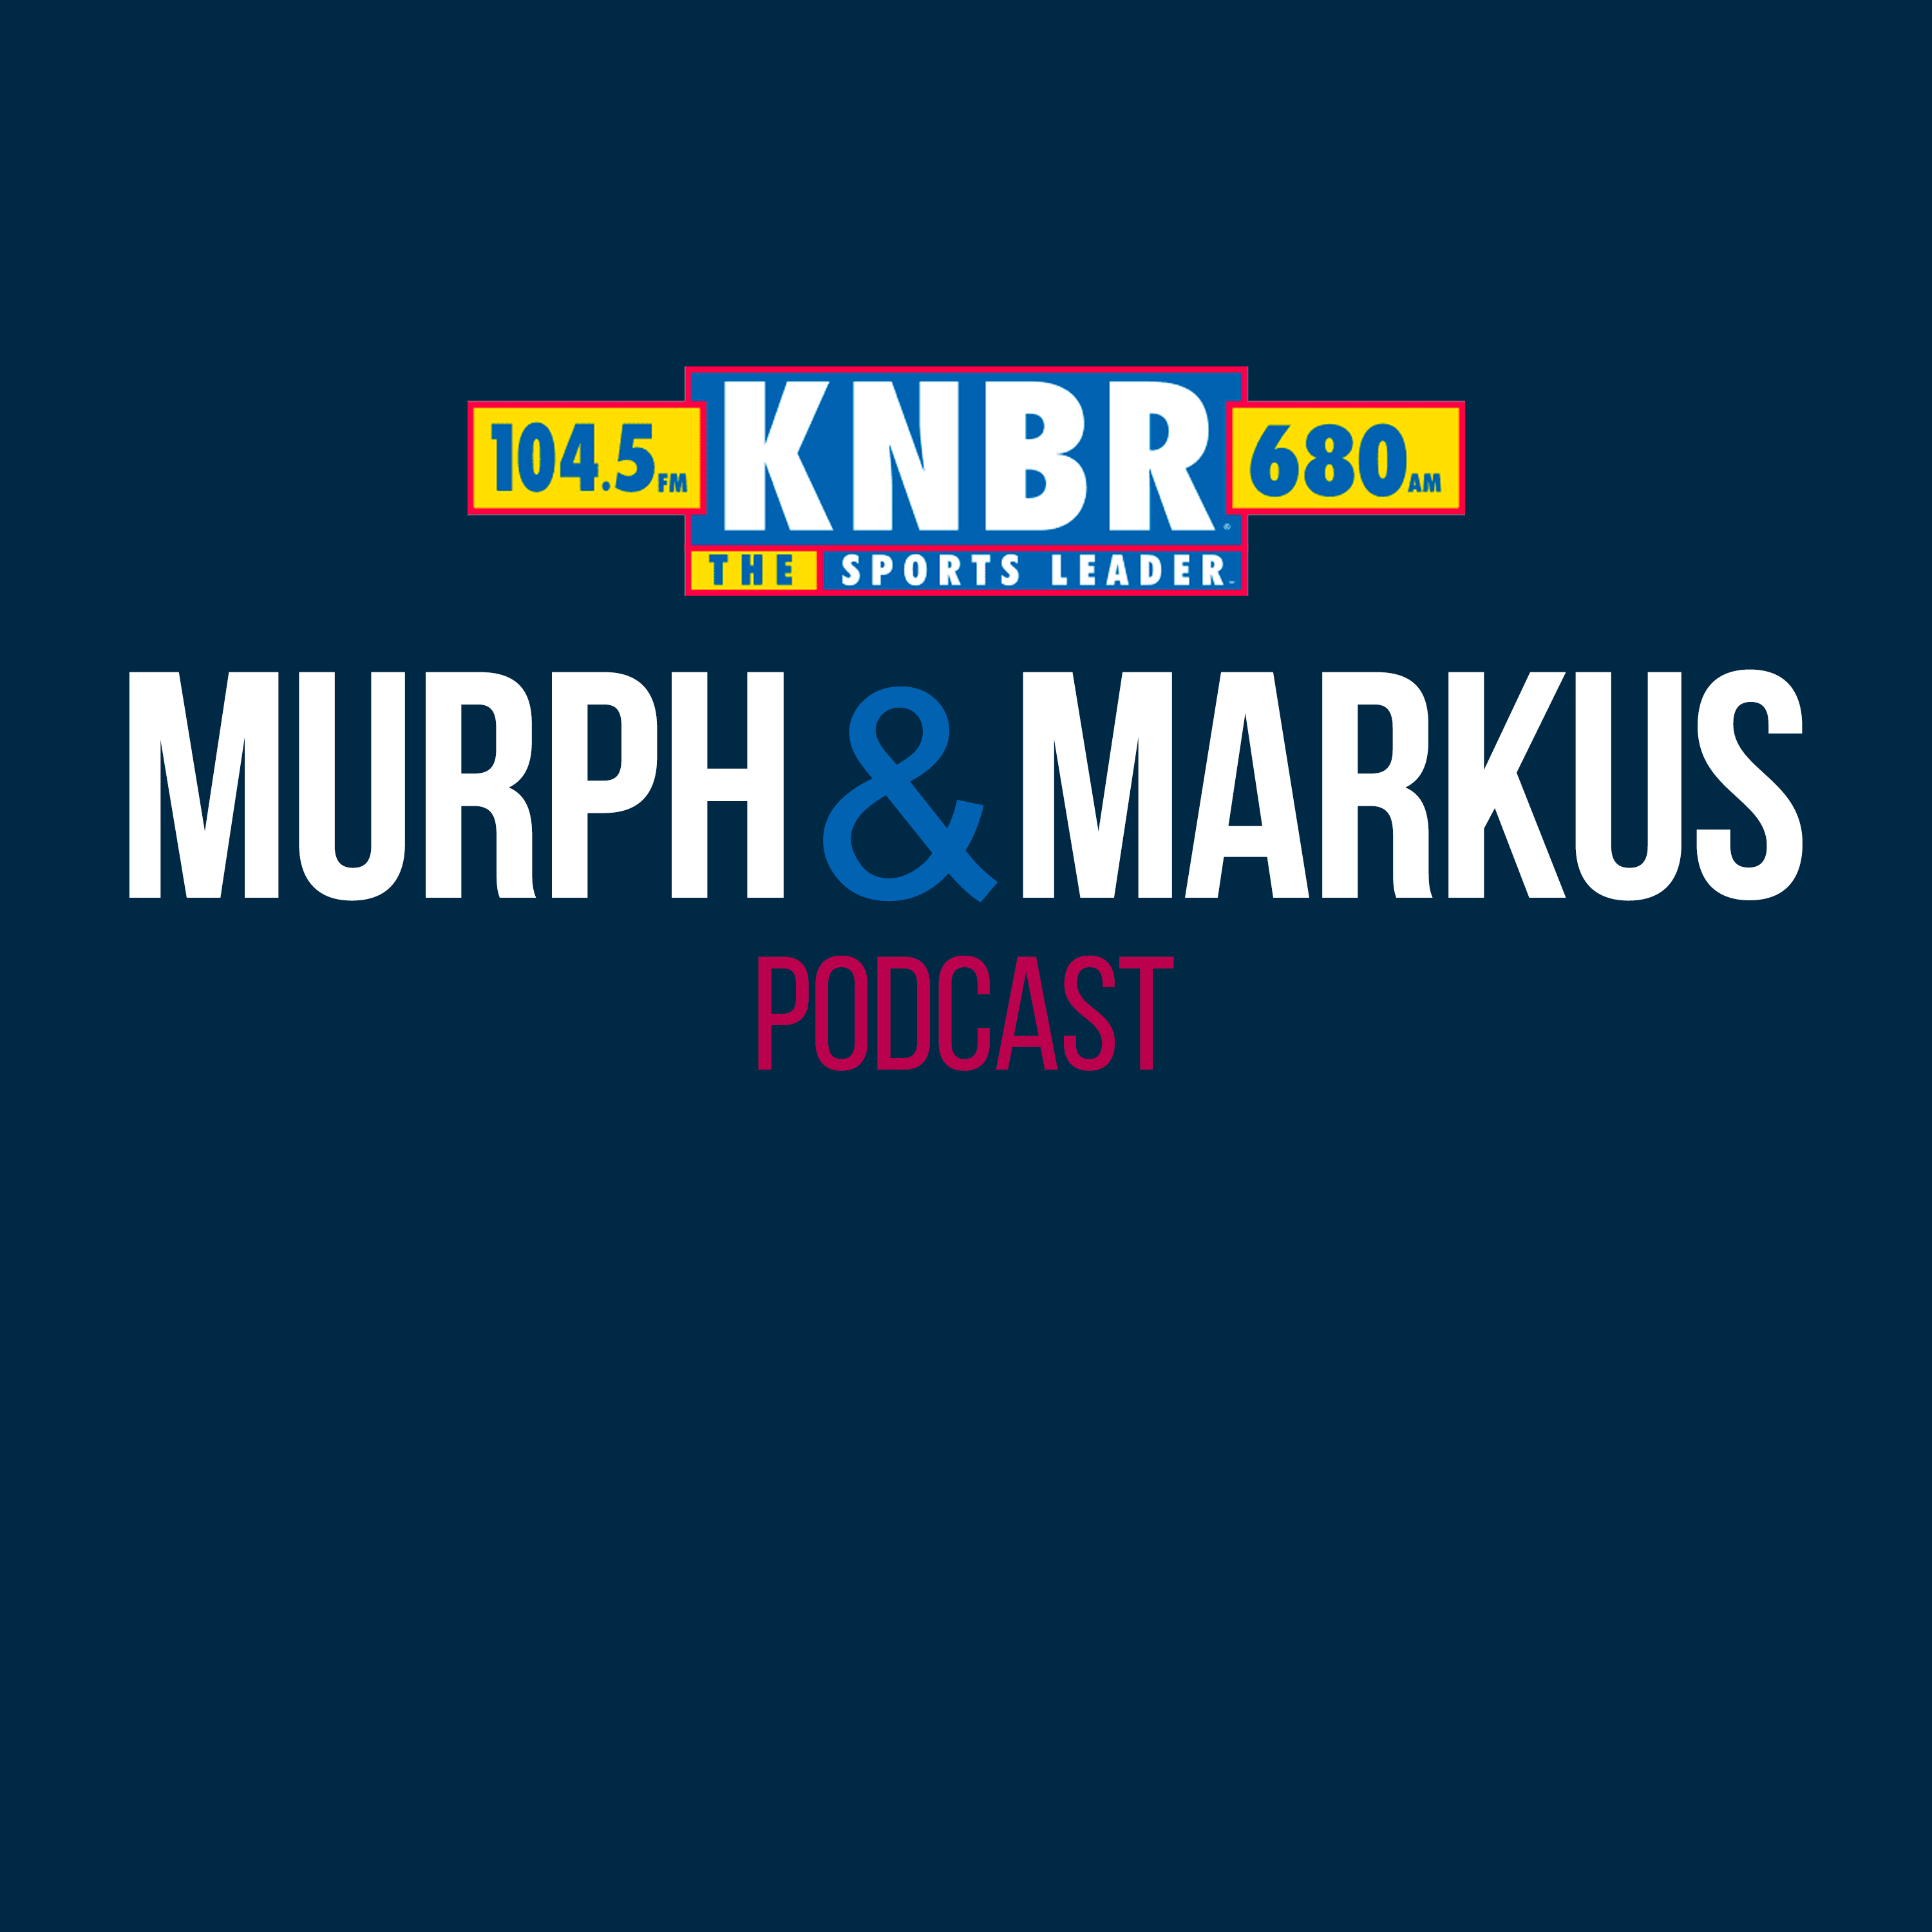 5-10 Alex Smith joins Murph & Markus to give his perspective on Brock Purdy, the pressure on 49ers QBs, and what he likes about Ricky Pearsall